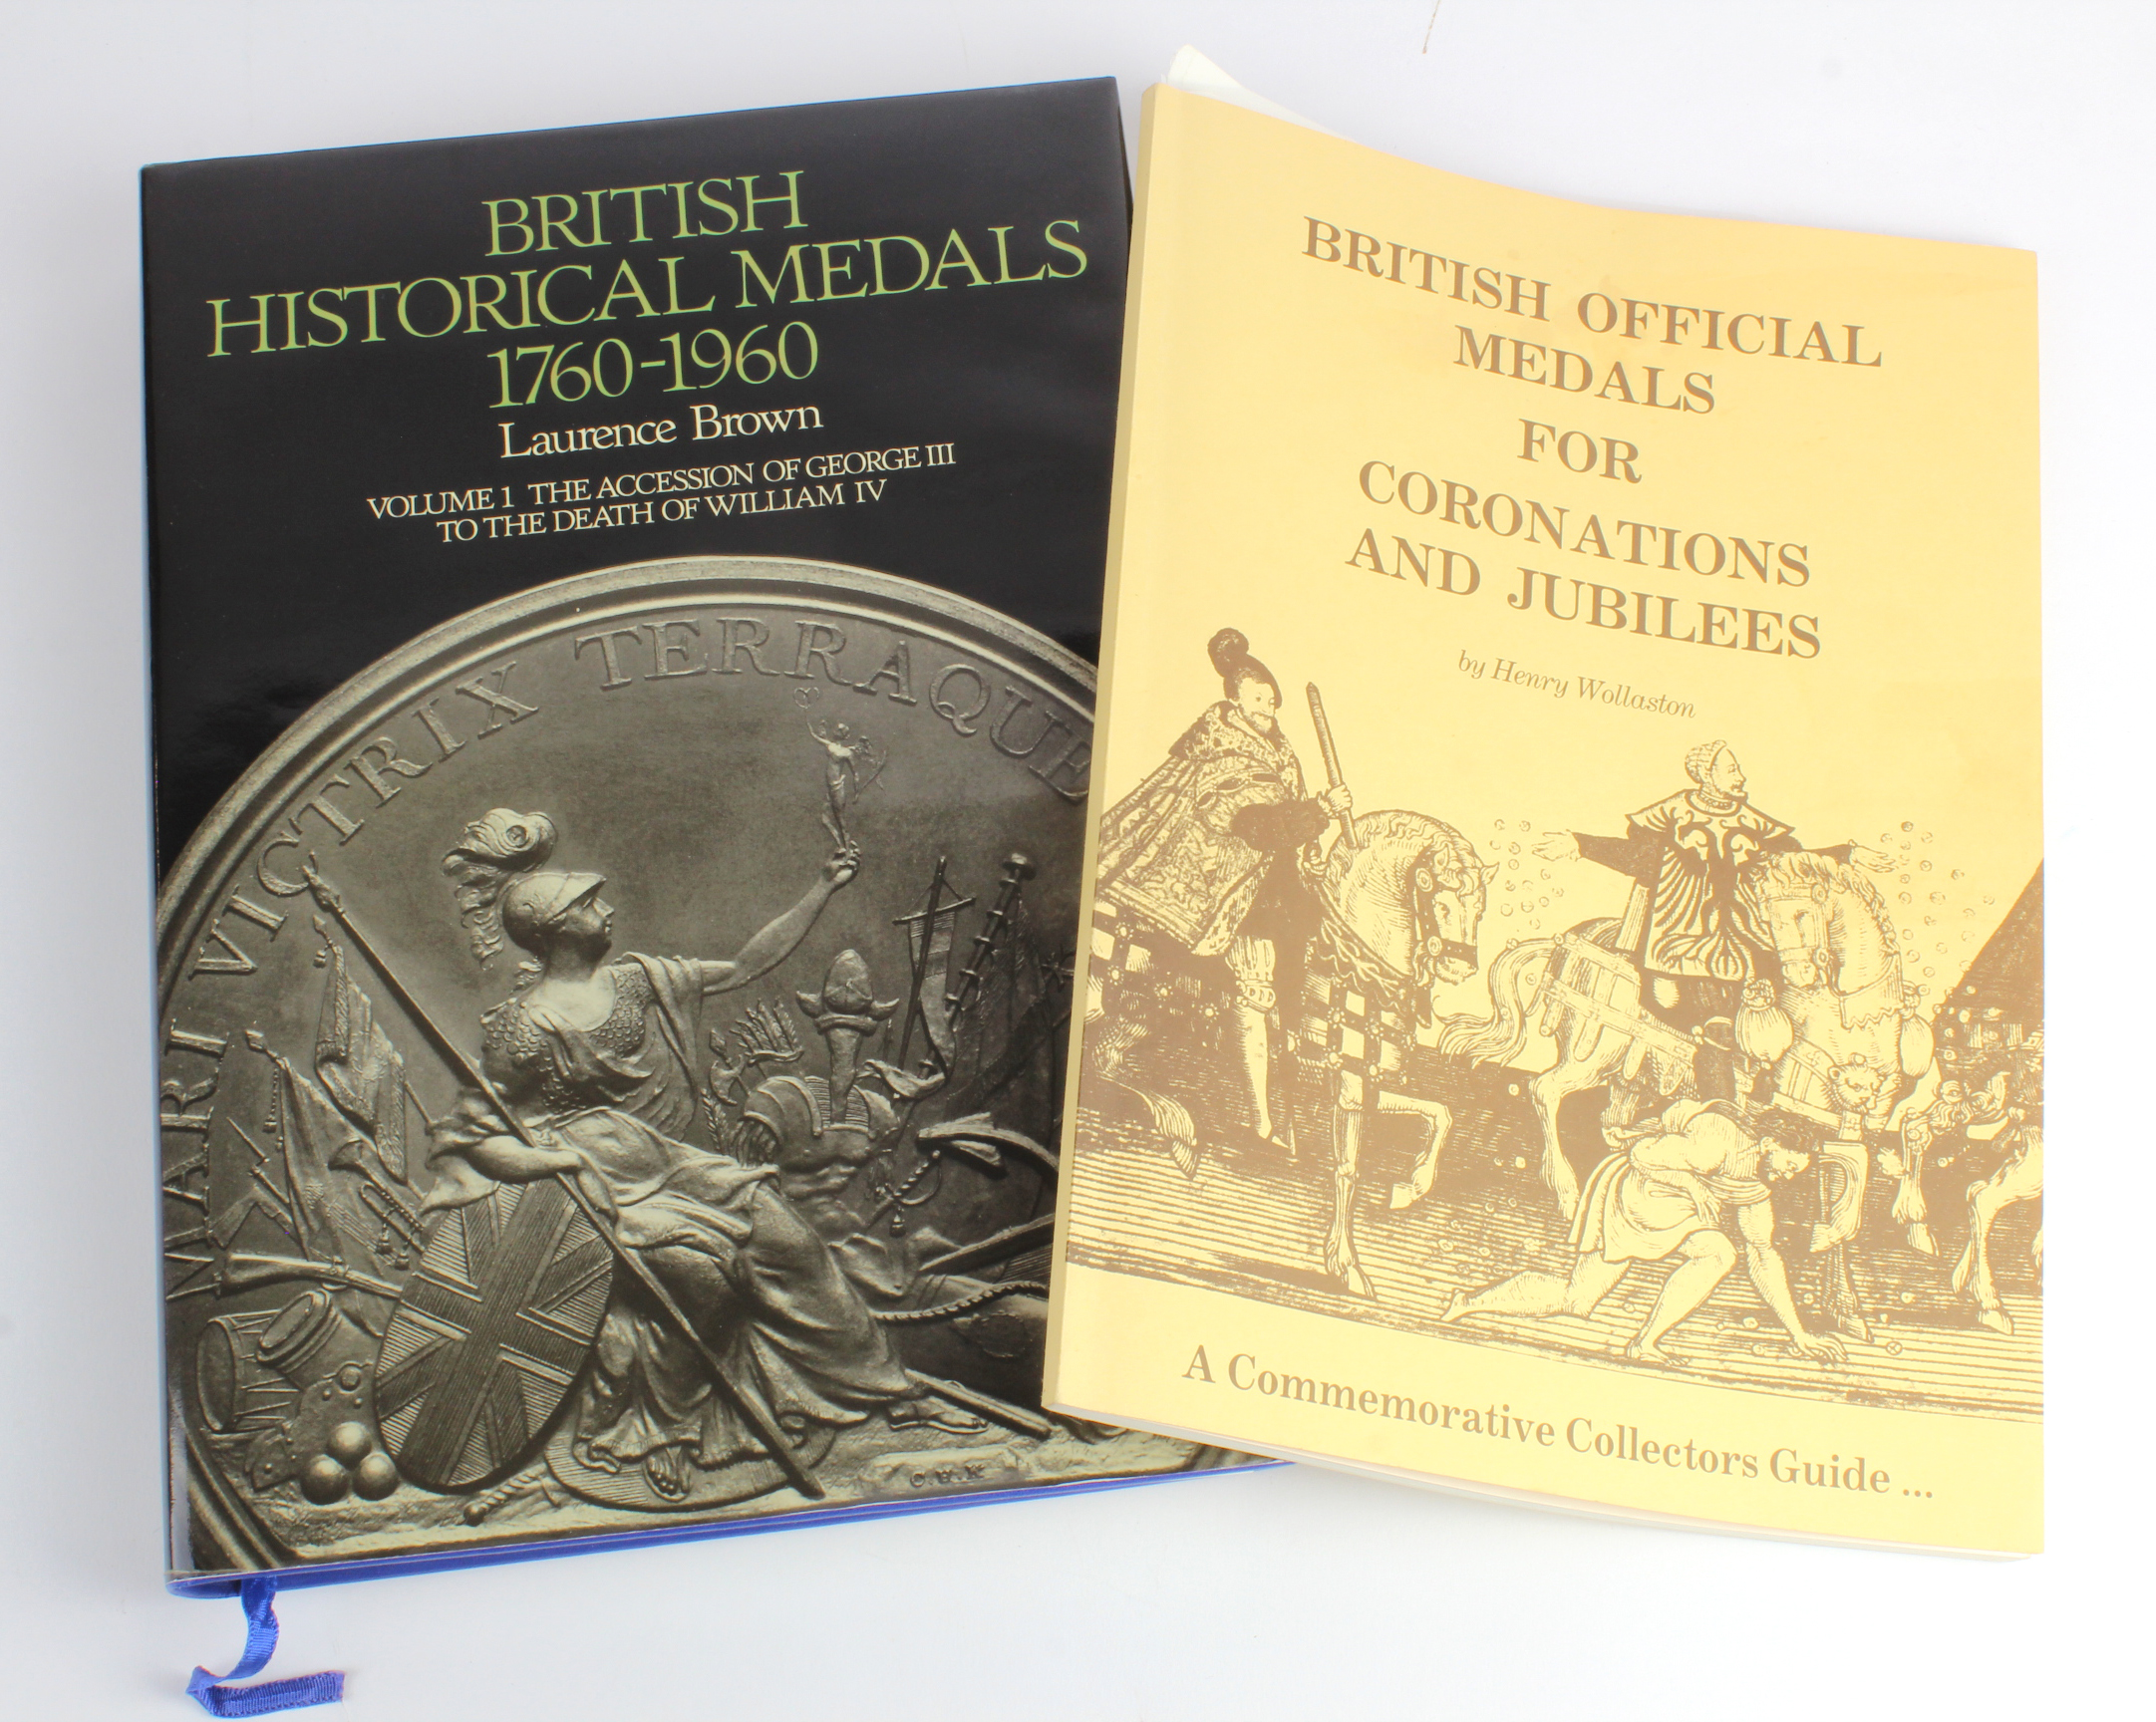 Books (2): British Official Medals for Coronations and Jubilees by Henry Wollaston 1978 - one of a